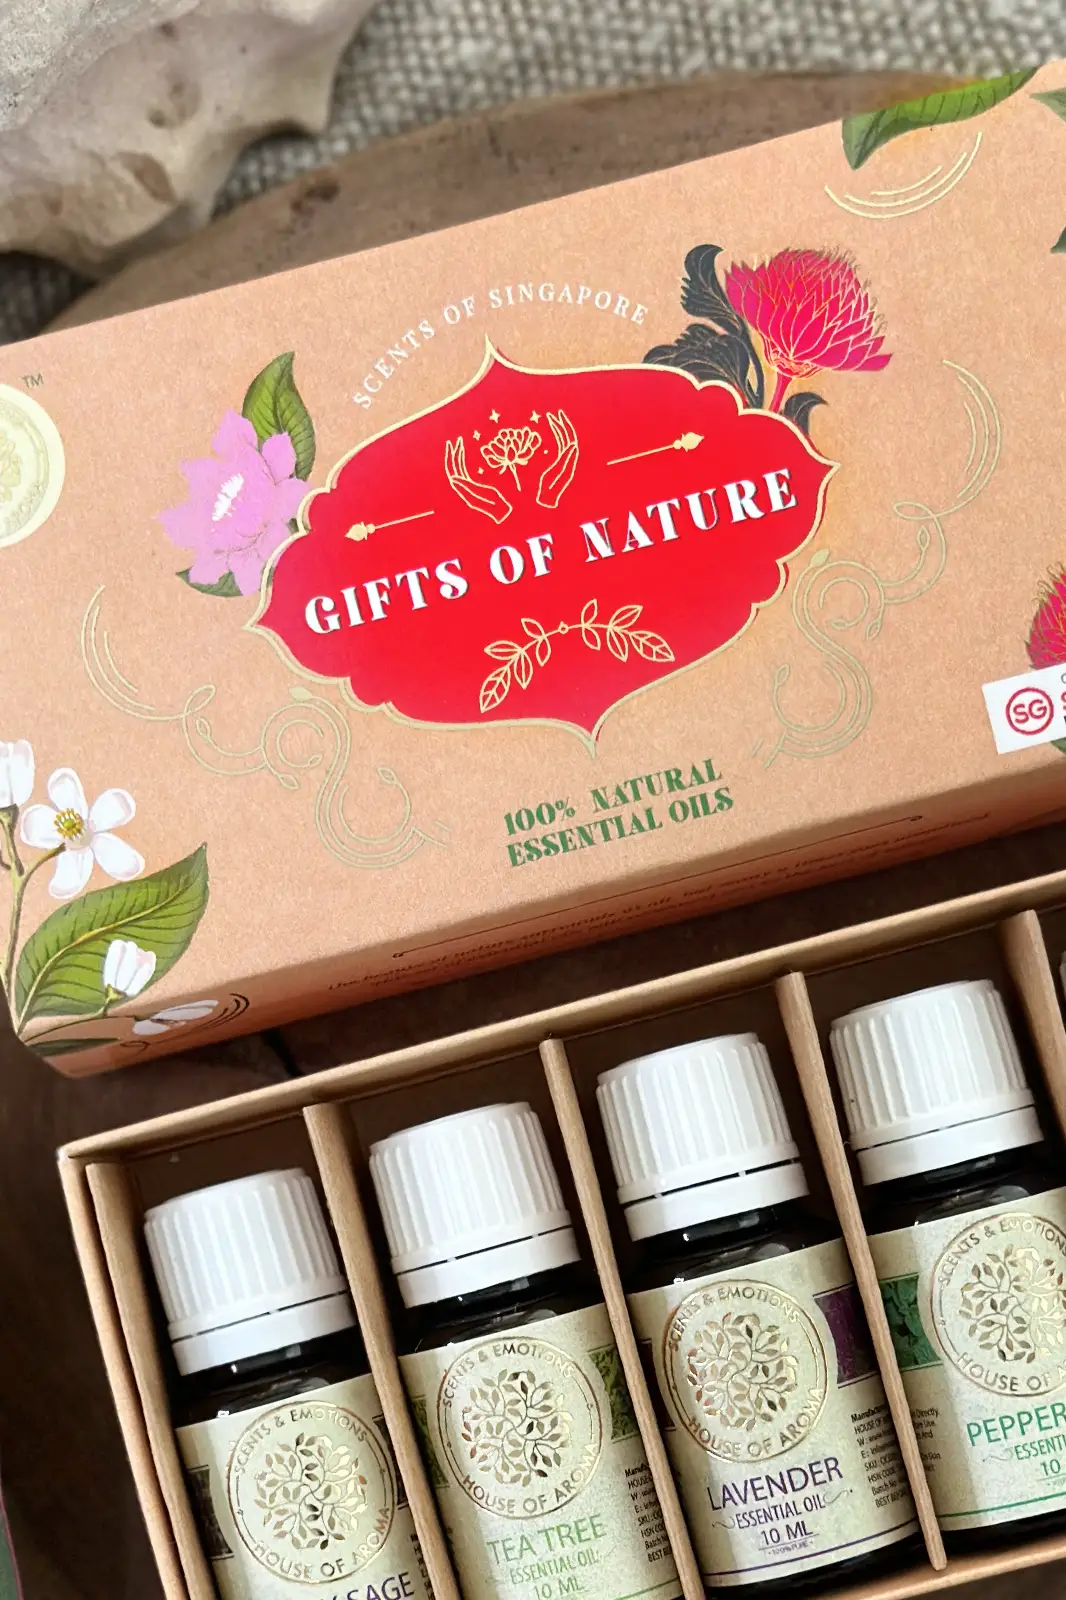 Natural essential oil gift set, essential oil gift set, gift set, essential oil, essential oil gift box, gift set for couple, women gift set, gift set box, gift set for diffuser, aroma gift set, gift set, festive gift, tea tree essential oils, cosmetic gift set, anniversary gift set, House Of Aroma